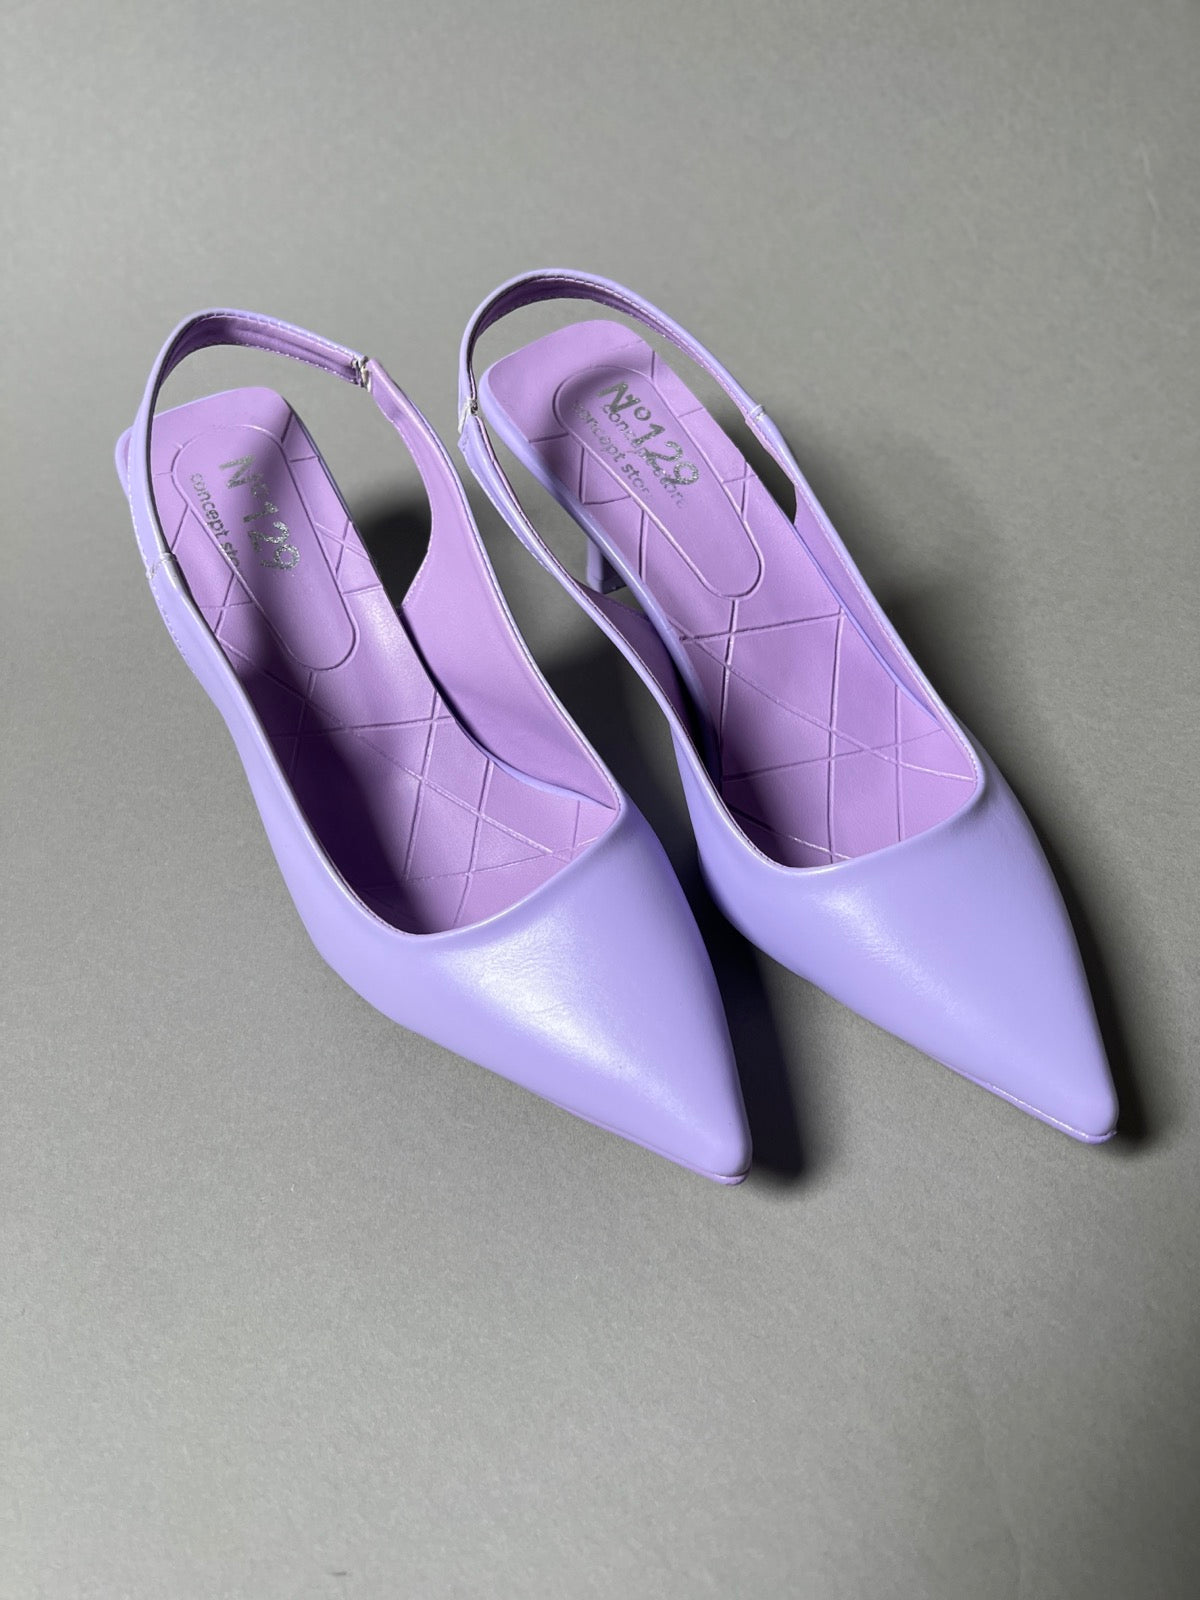 Schuhe SLINGBACK by N°129. No129 concept store Duesseldorf 